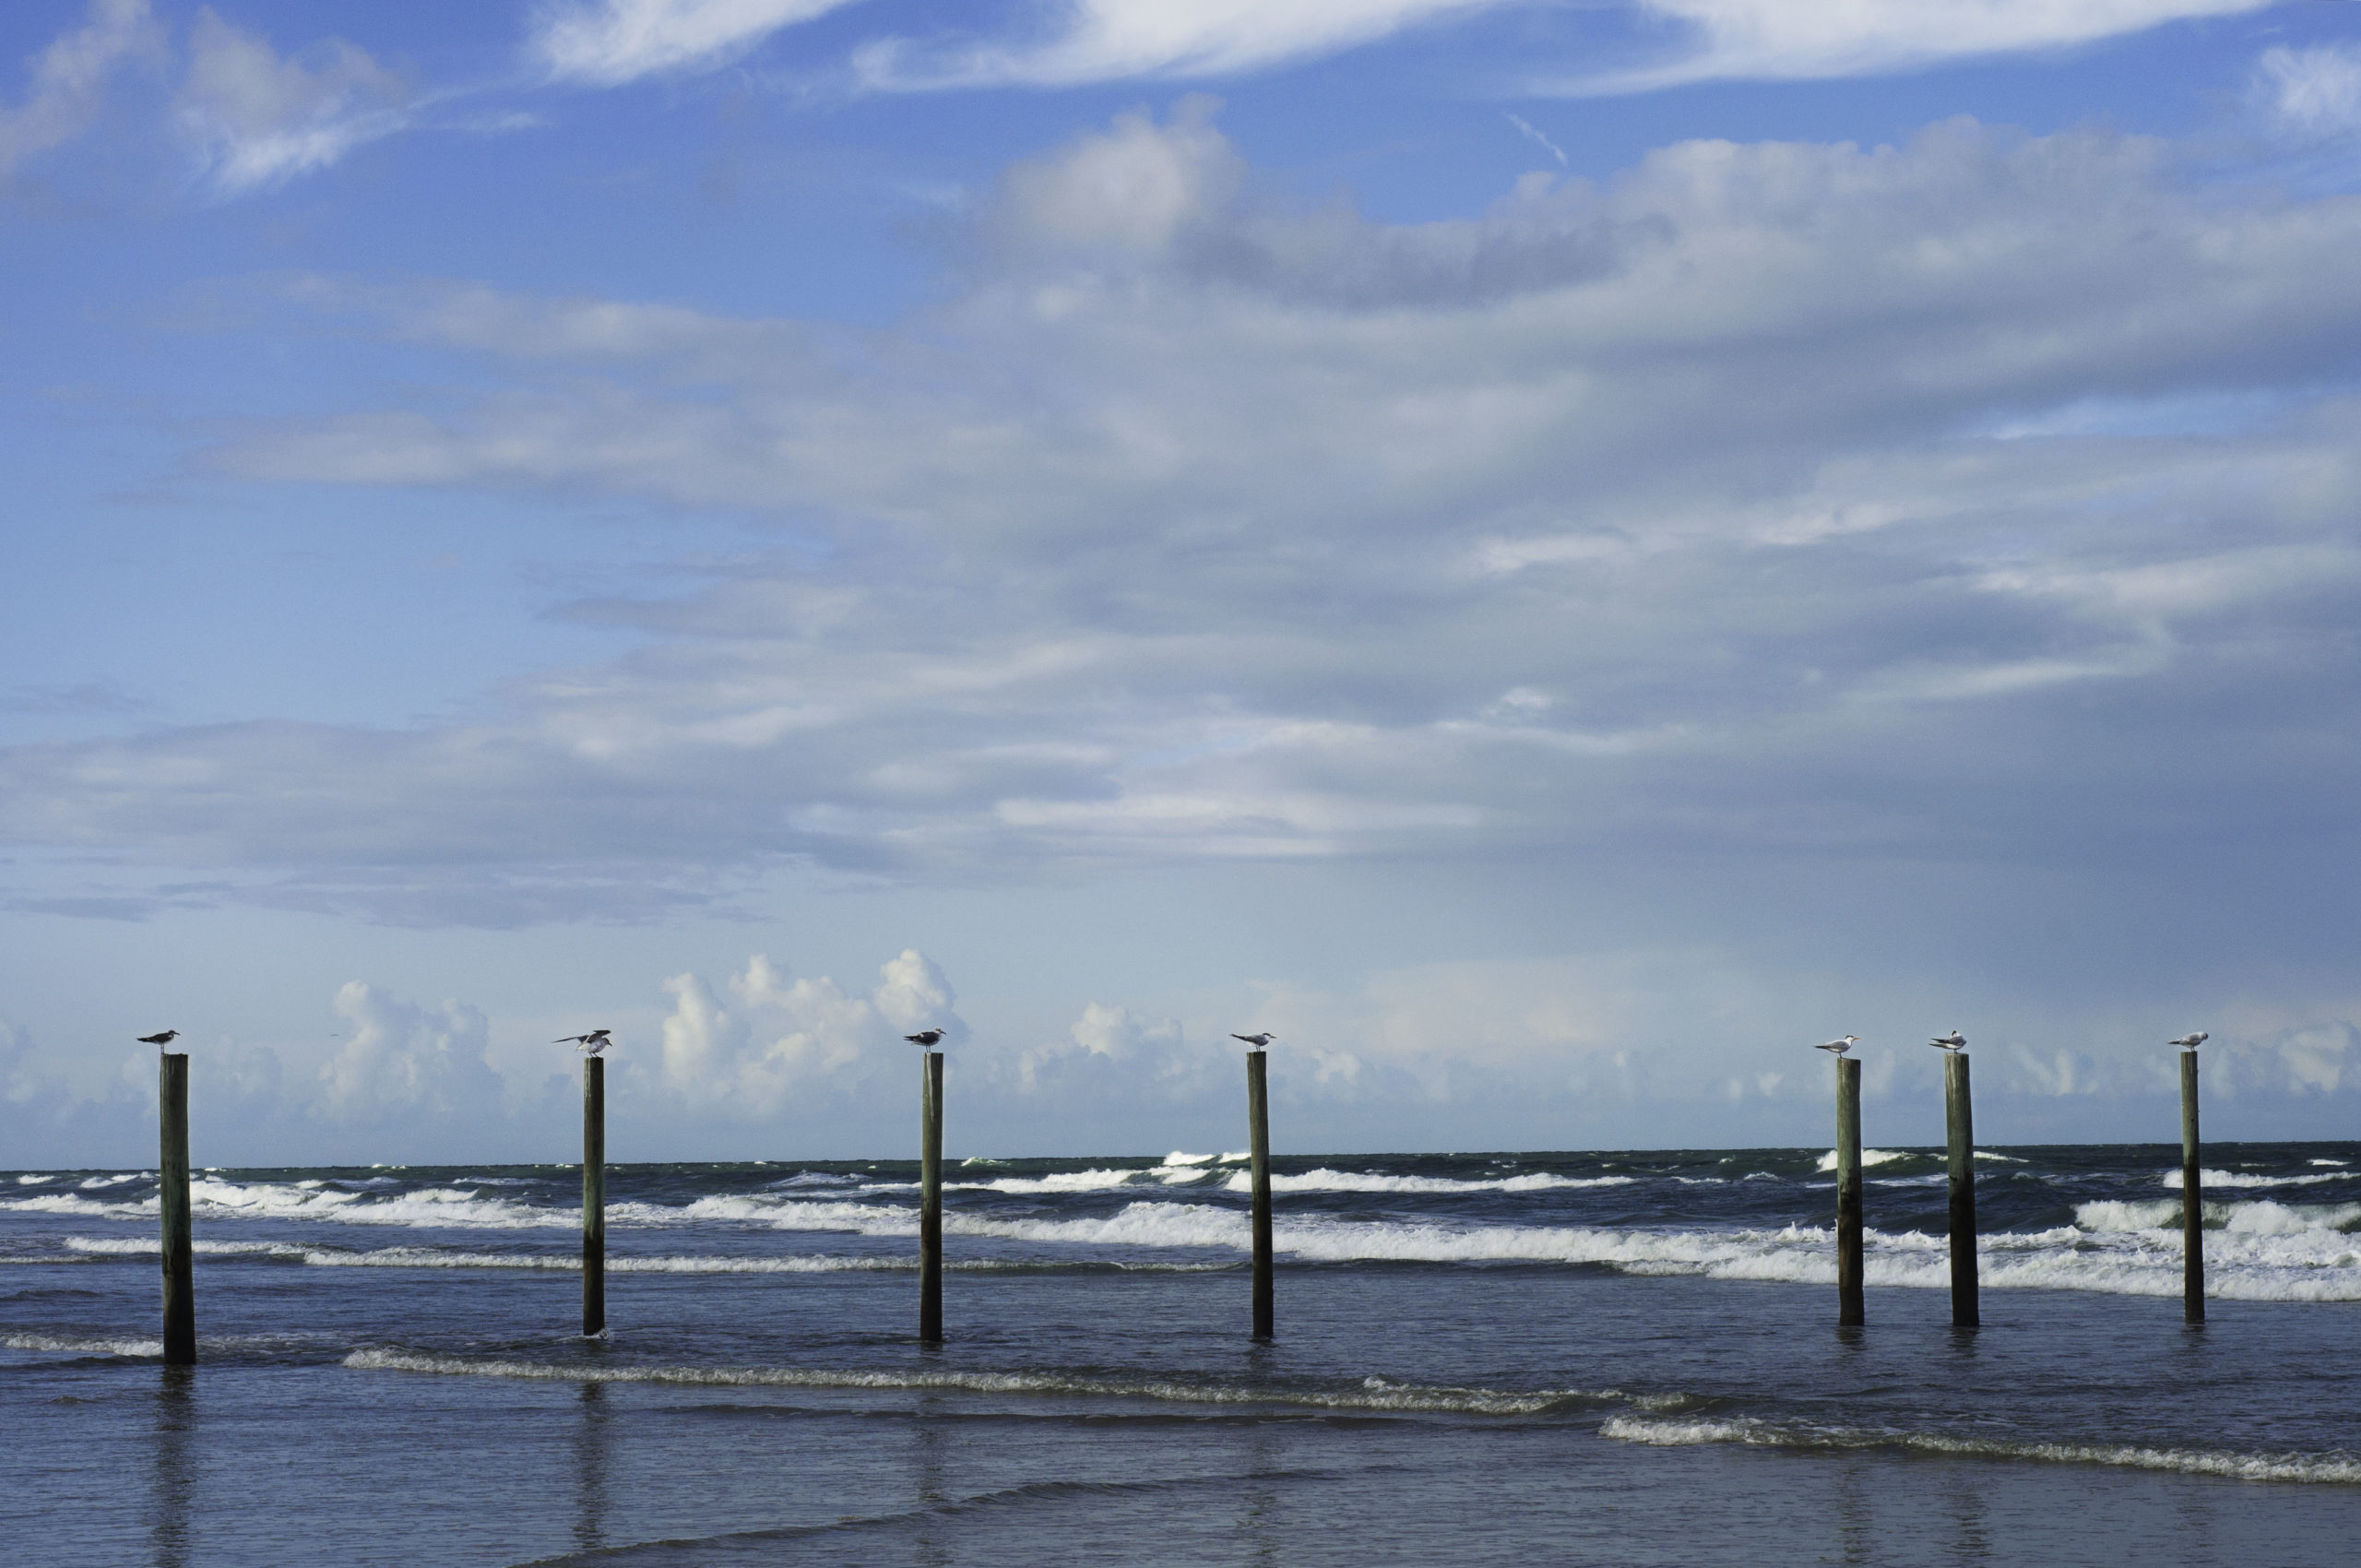 Wide shot of several birds standing on posts in water on beach